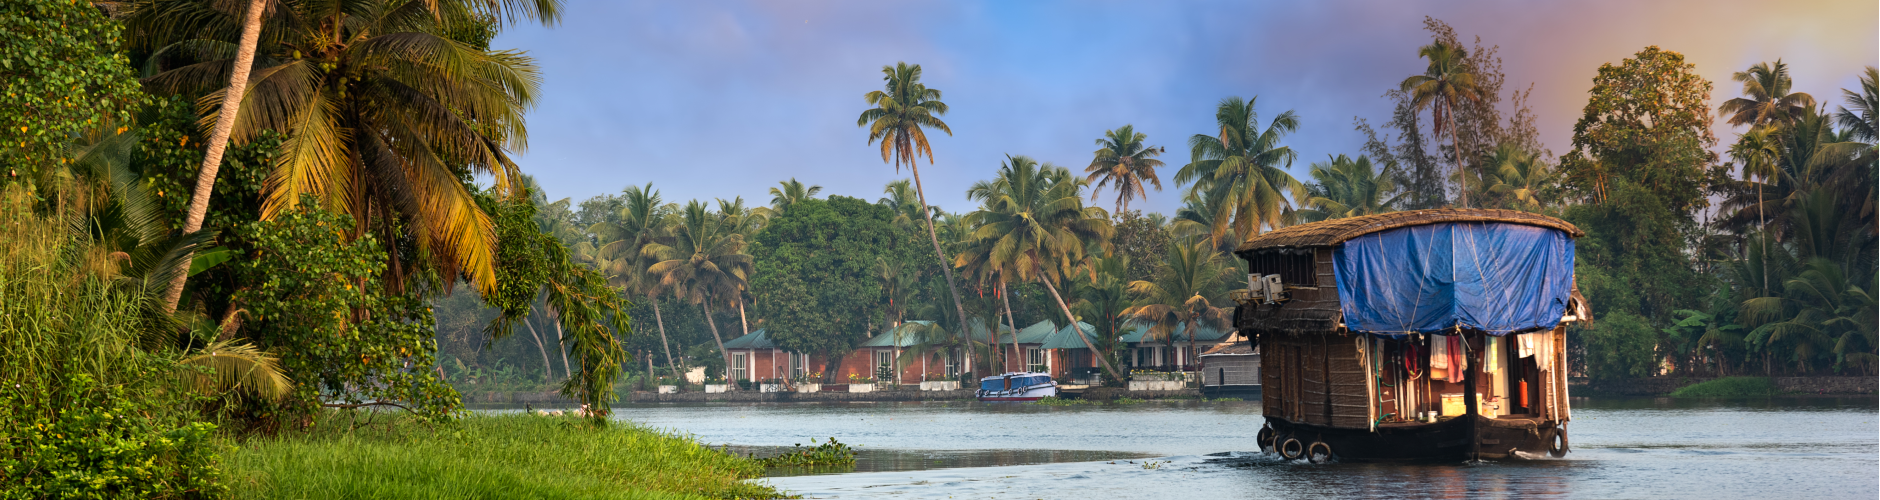 Image of alleppey boat house 